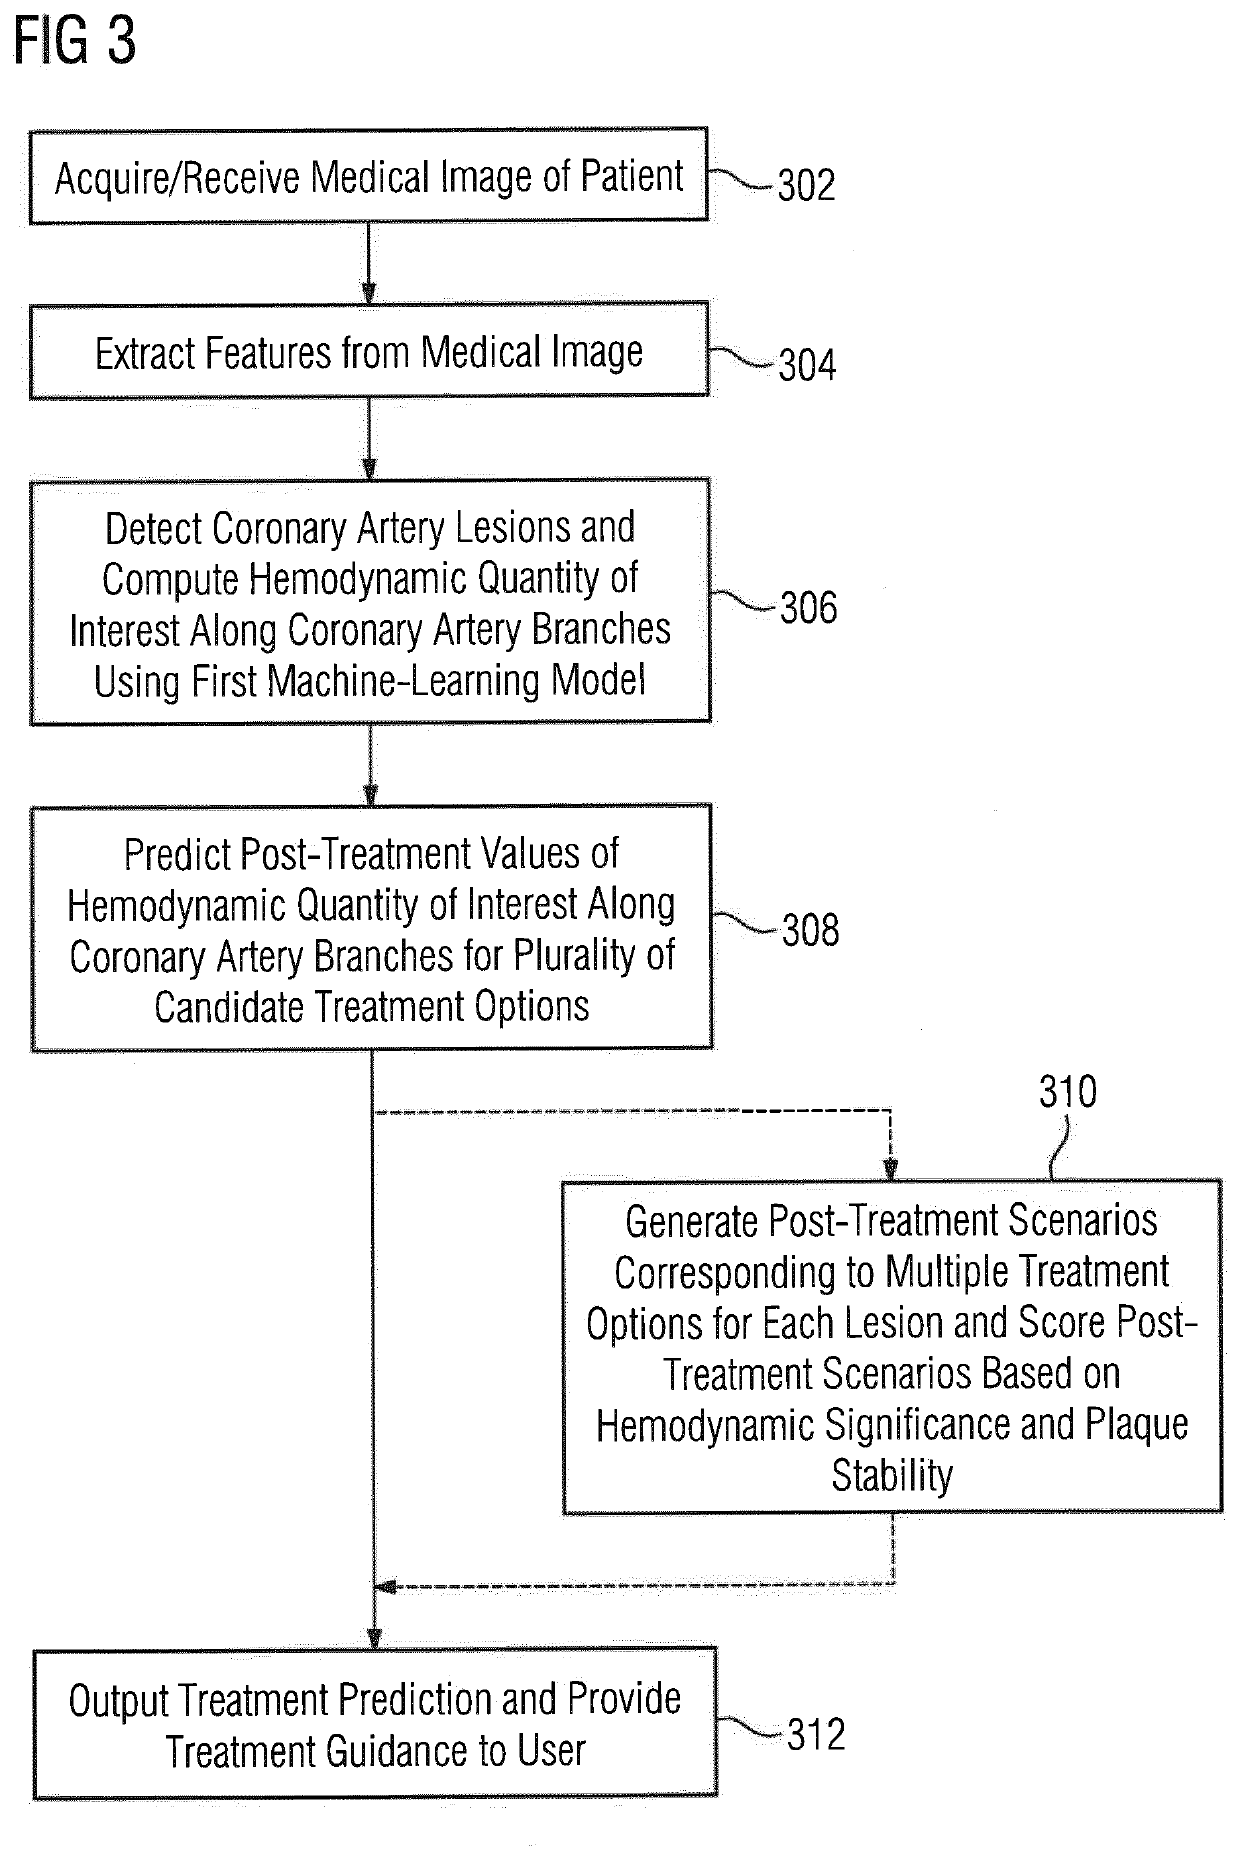 Non-invasive assessment and therapy guidance for coronary artery disease in diffuse and tandem lesions